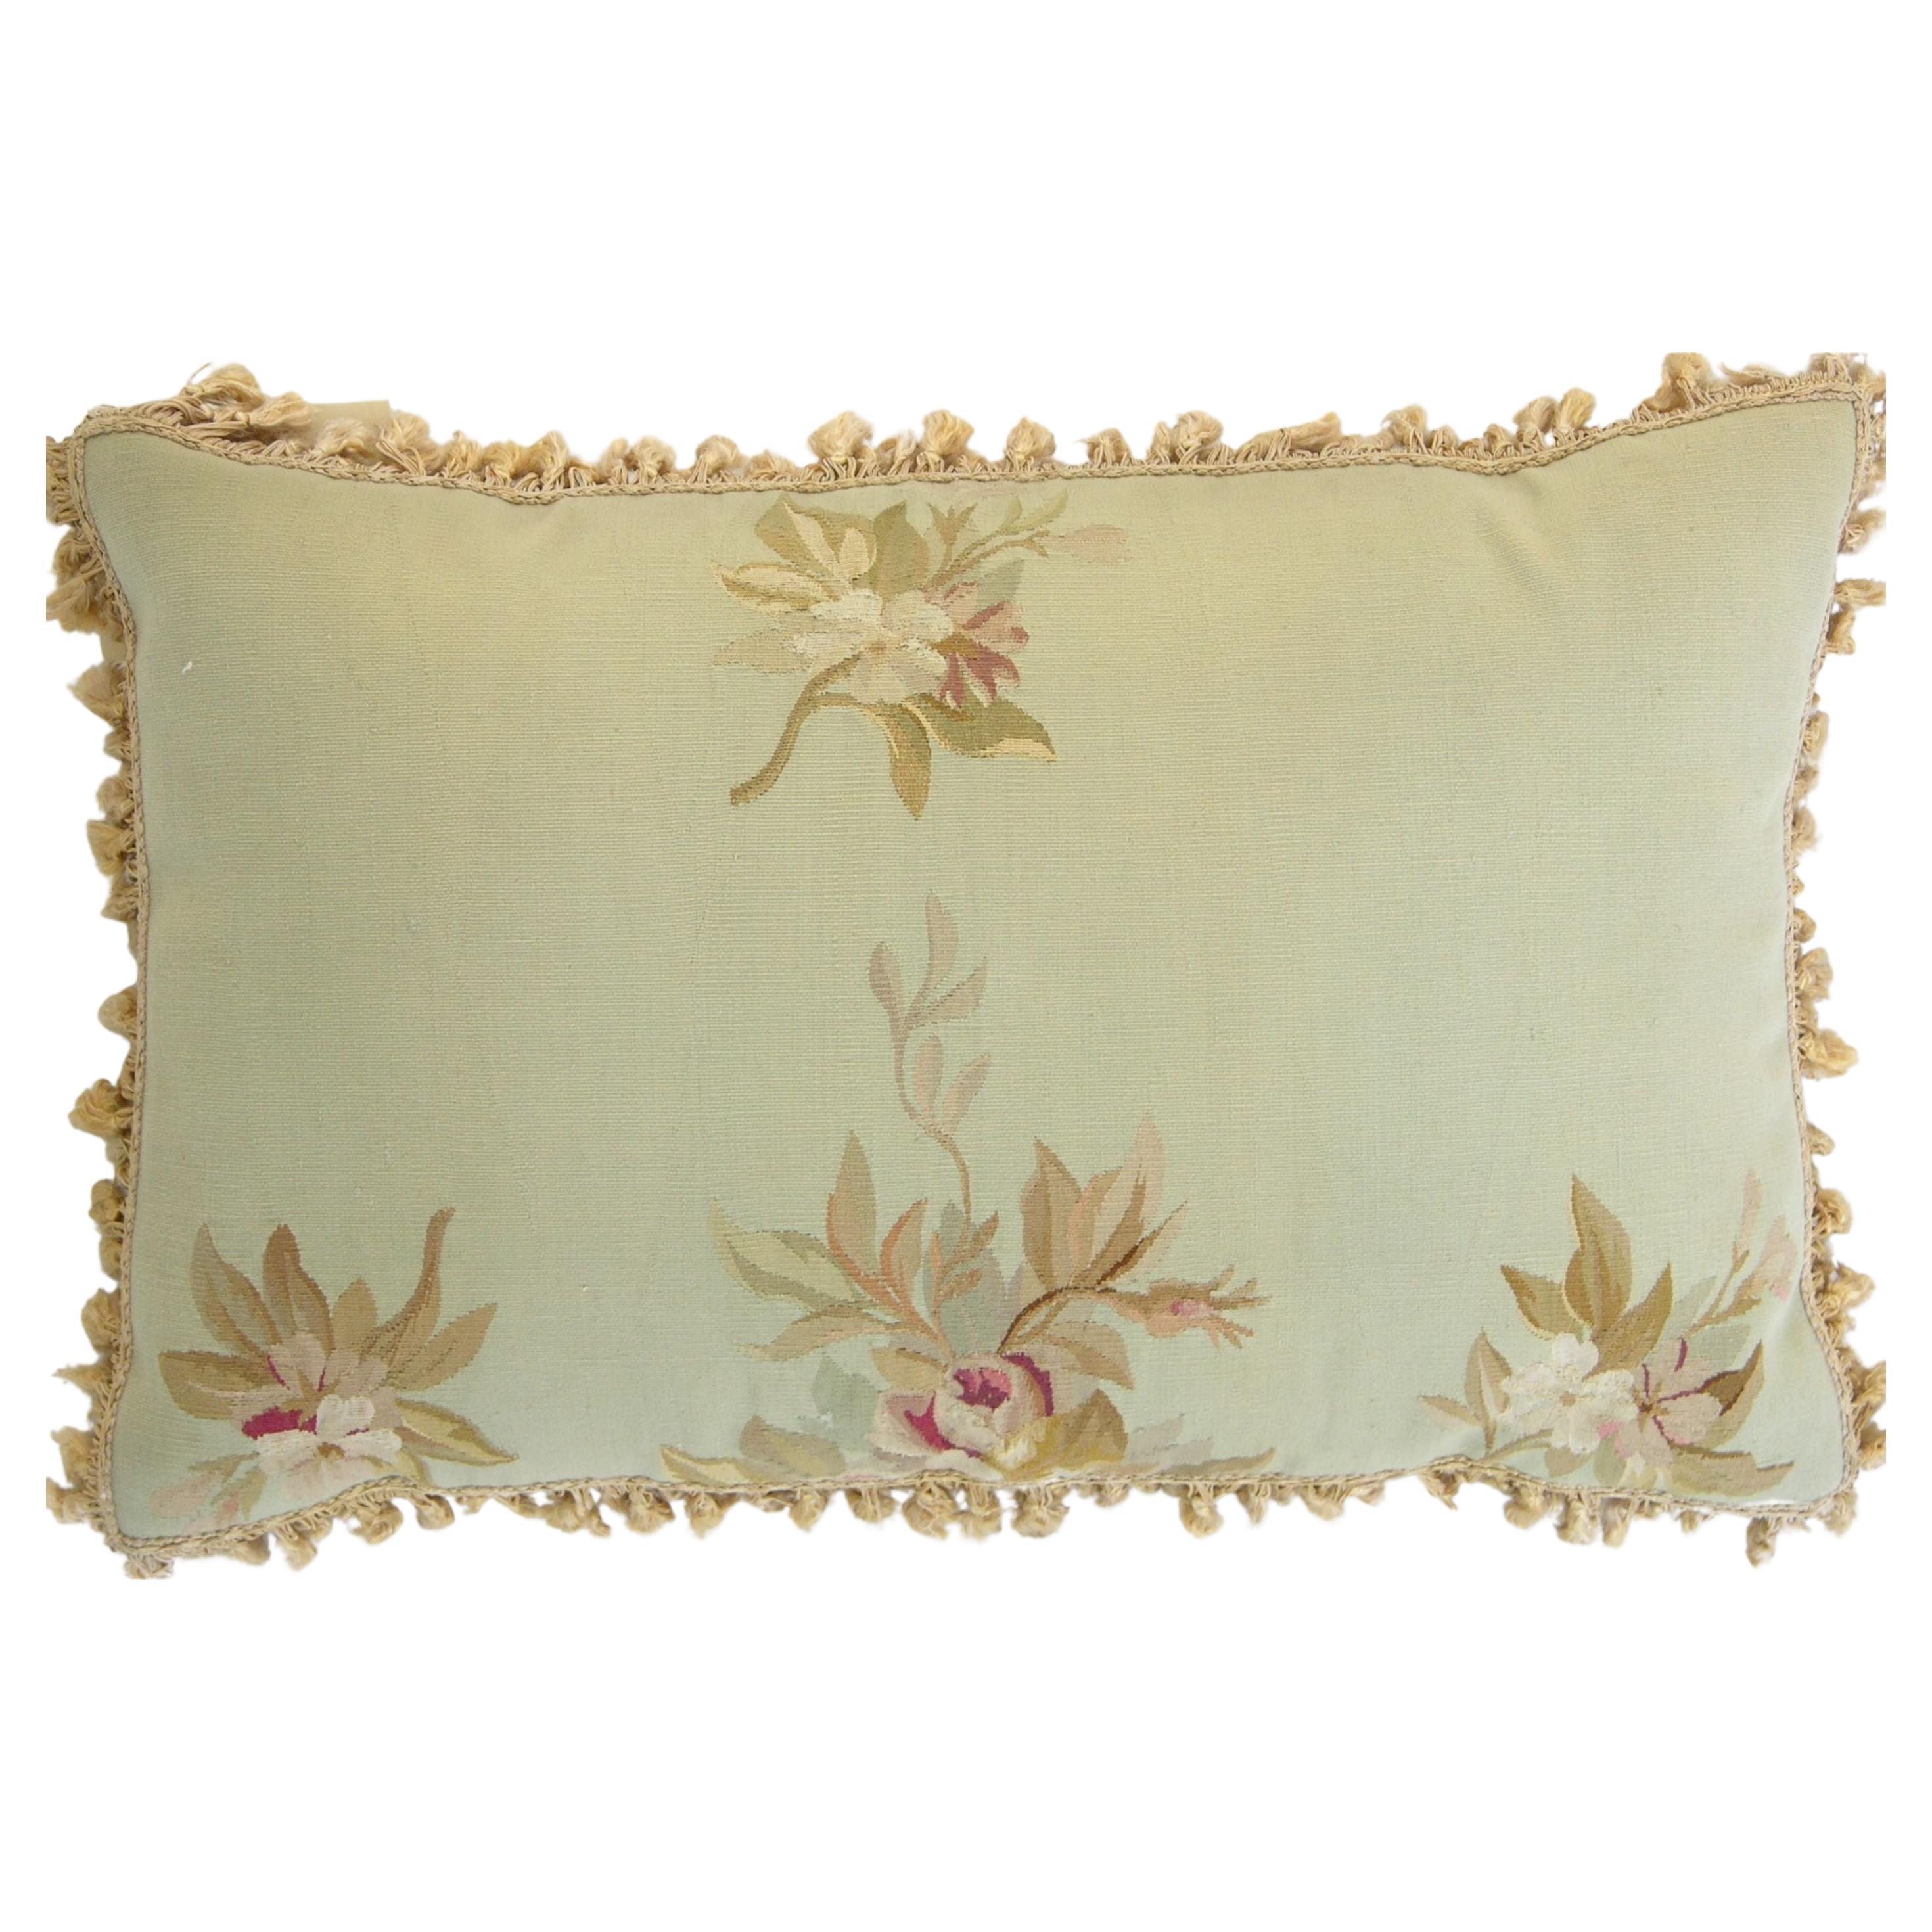 Circa 1850 Antique French Pillow For Sale